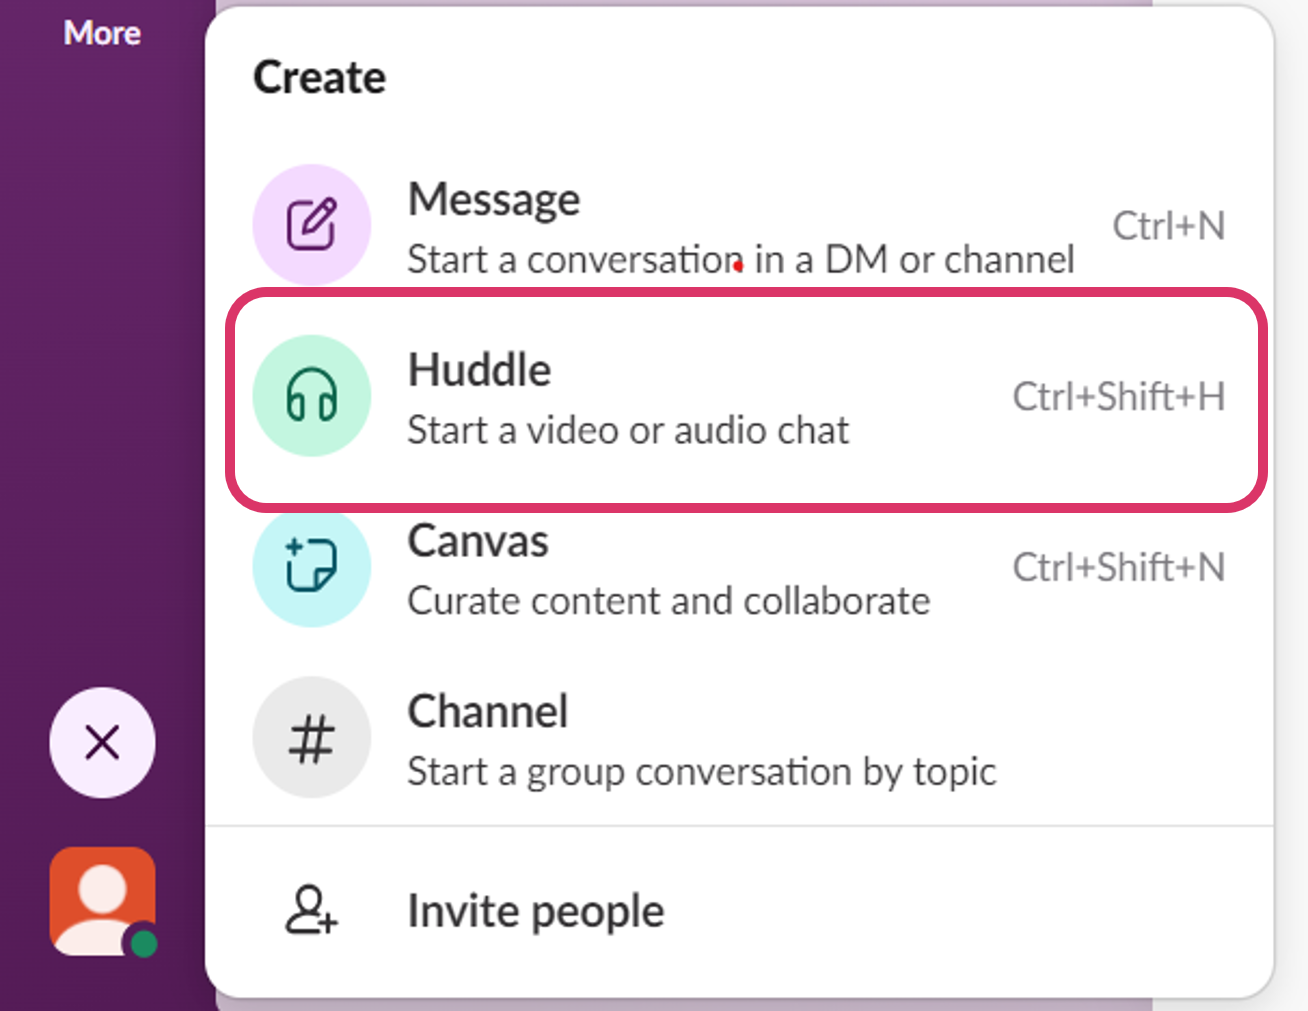 Pop up with Huddle command selected